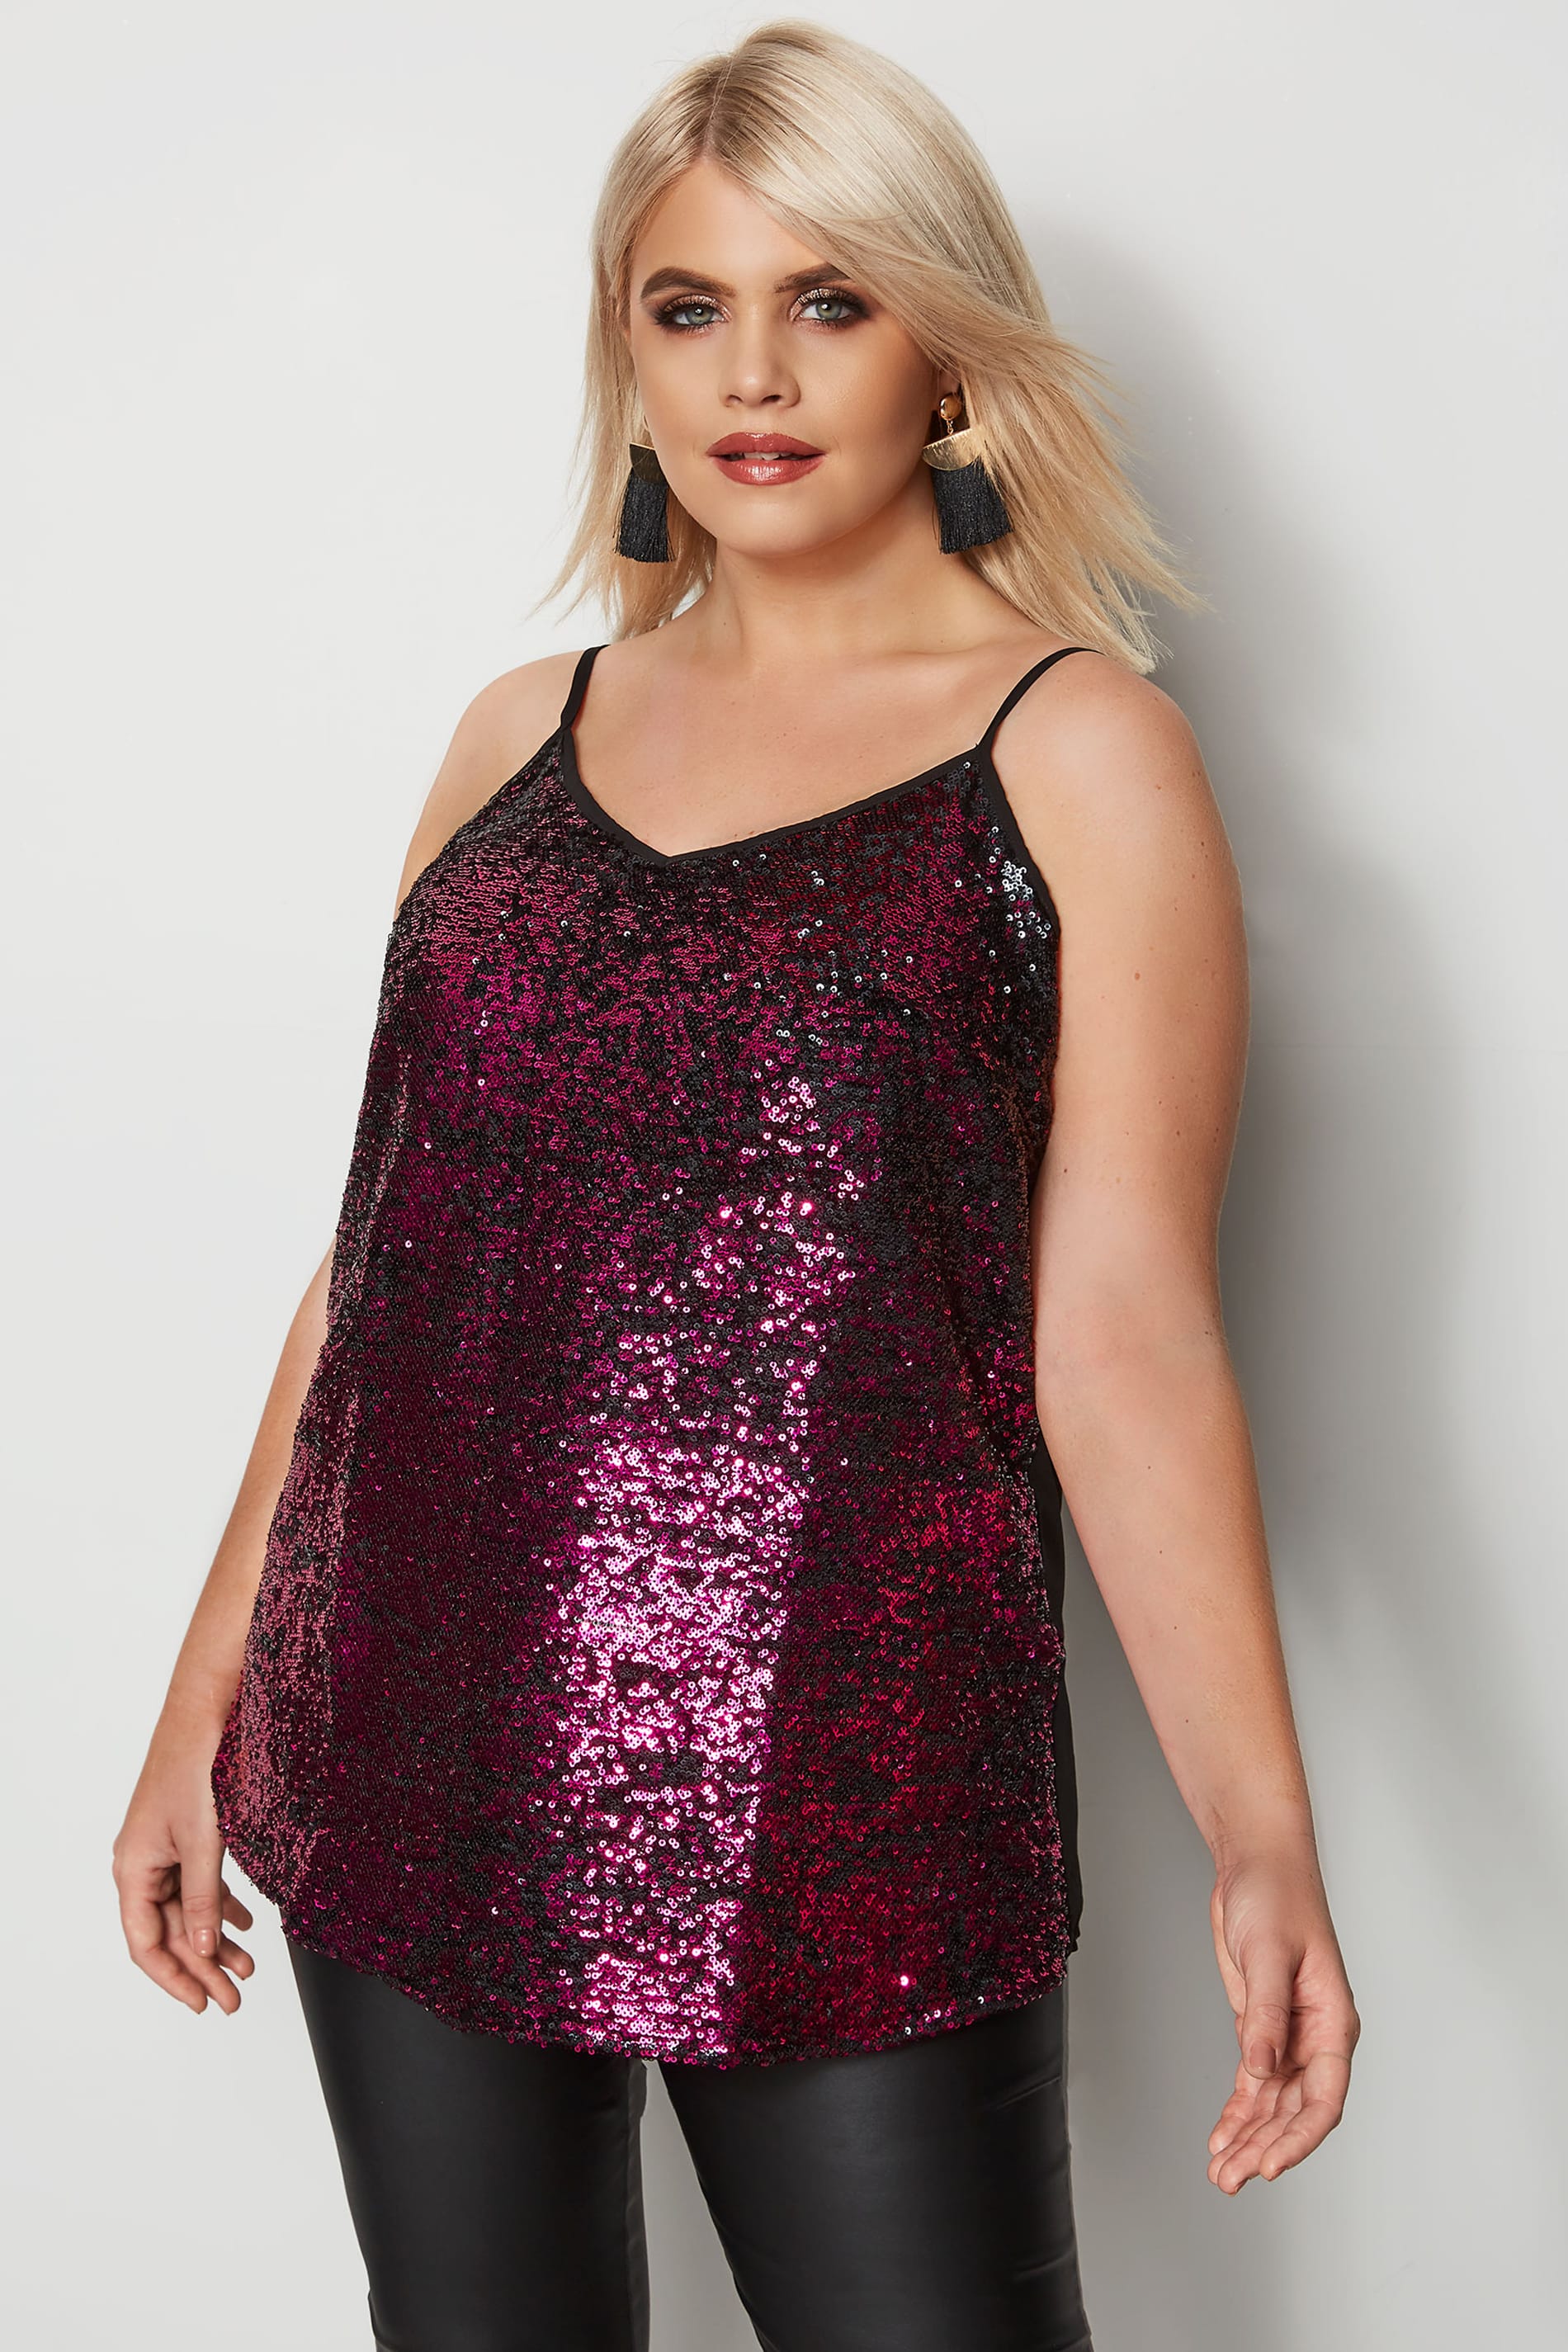 LUXE Black & Pink Sequin Cami | Yours Clothing